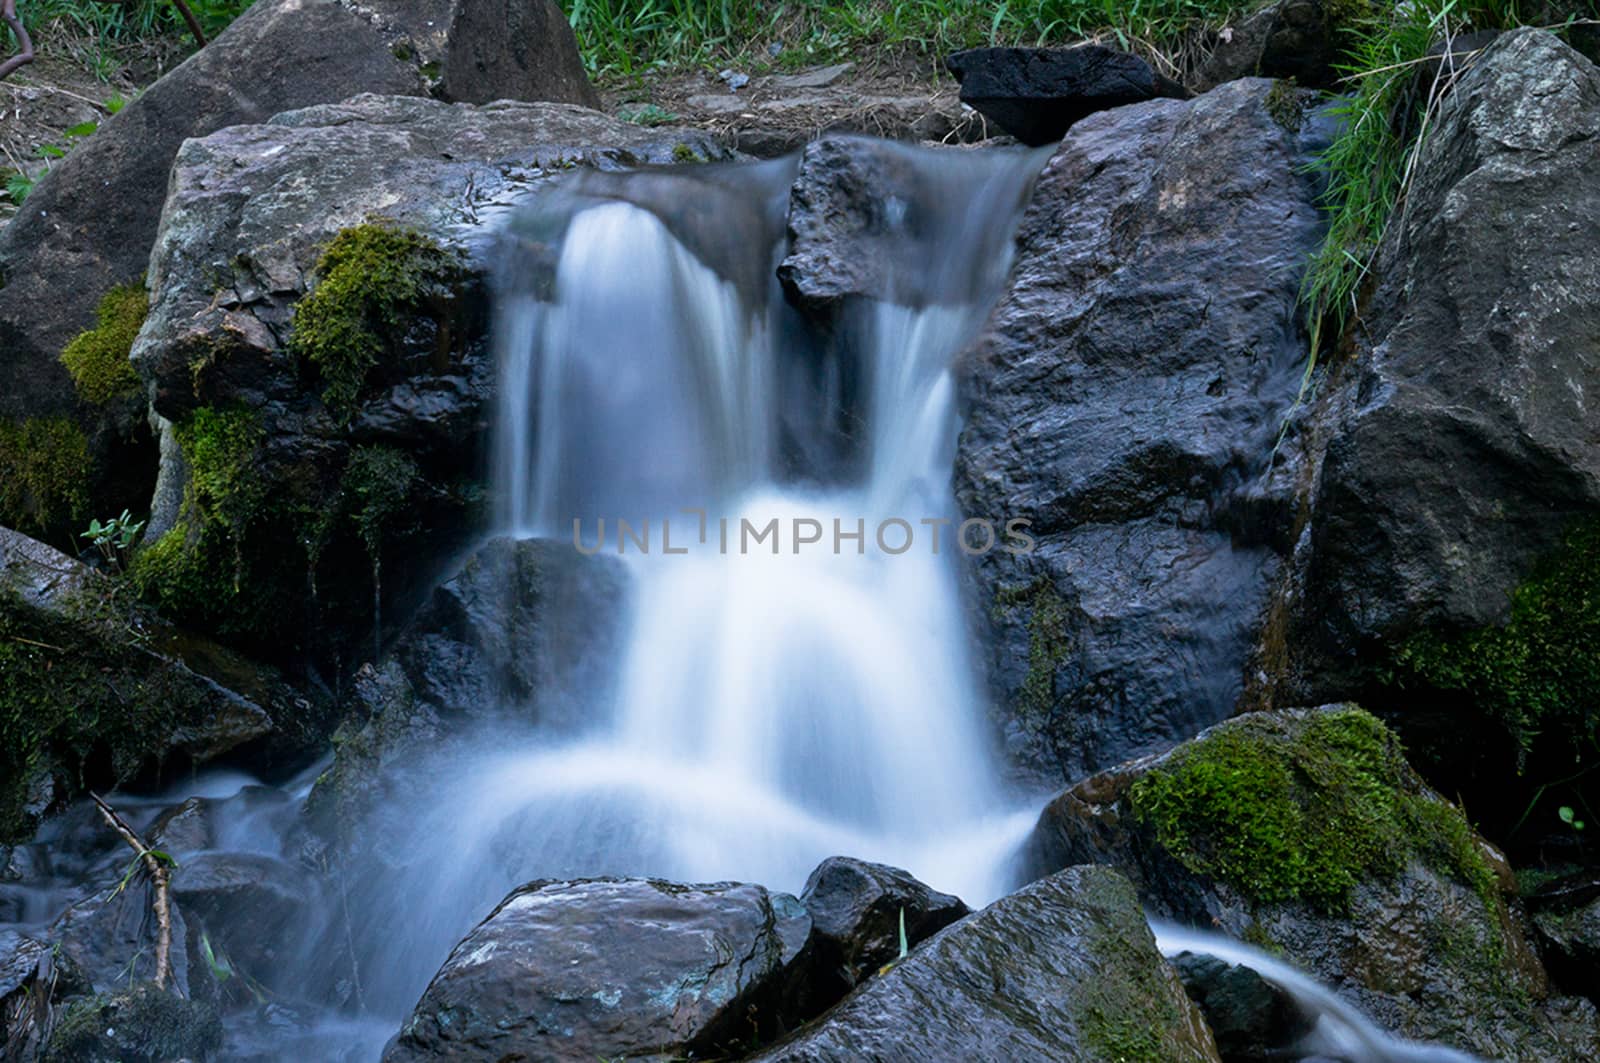 A small waterfall, photographed on a long exposure.